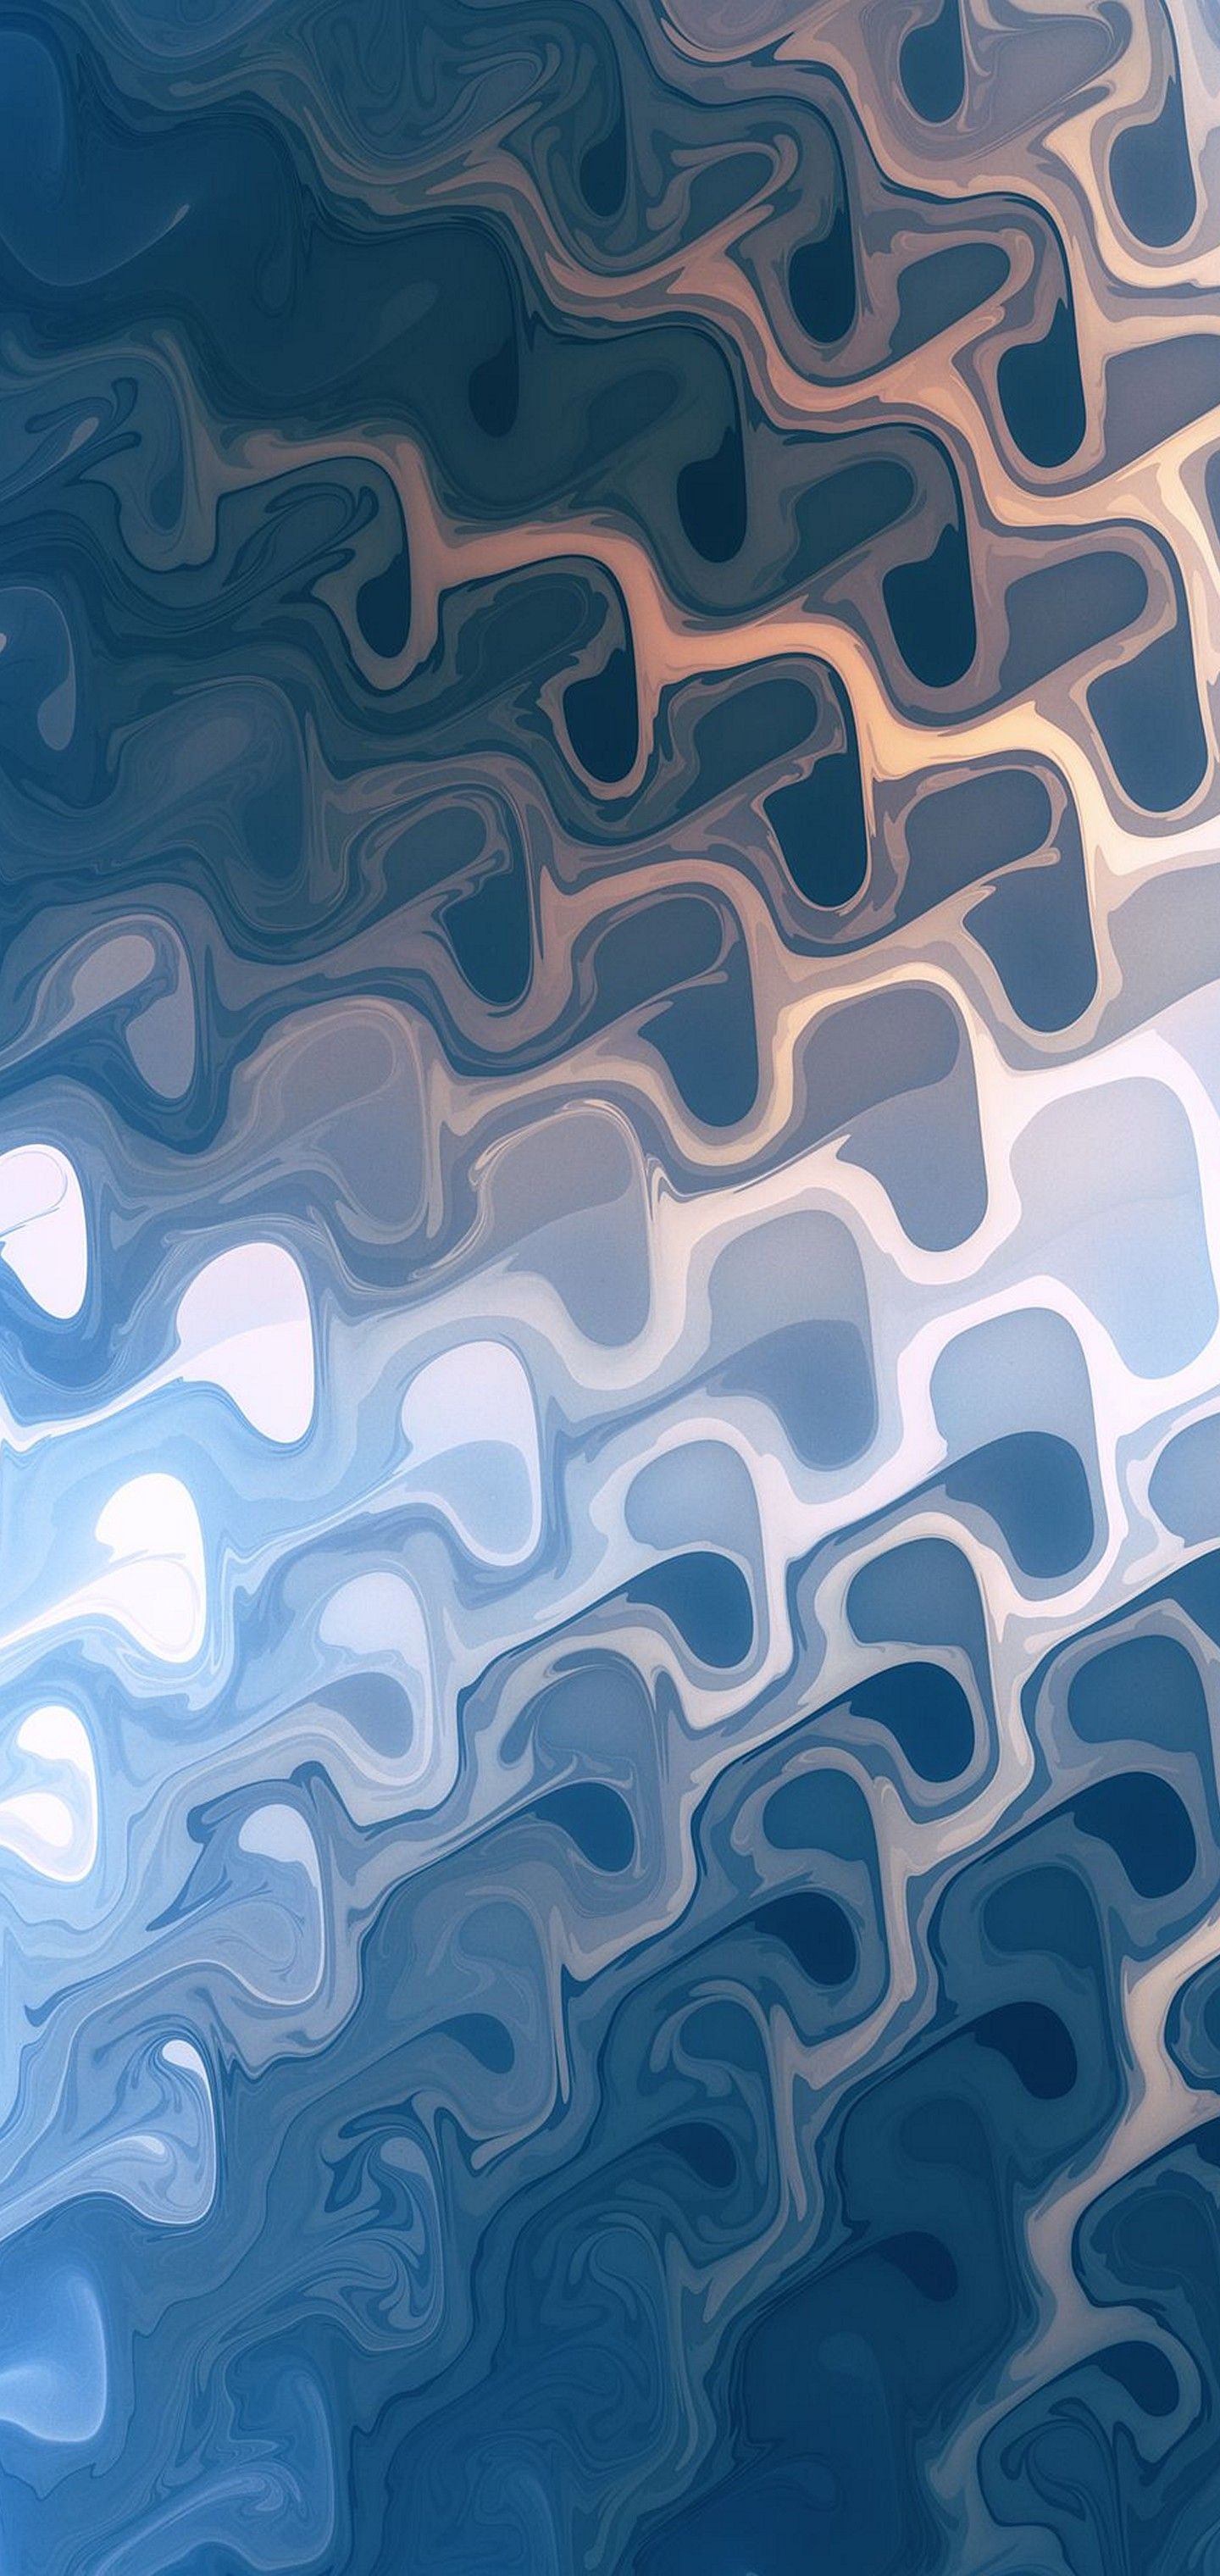 Painted Blue 3D Abstract Wallpaper A9 2020 Stock